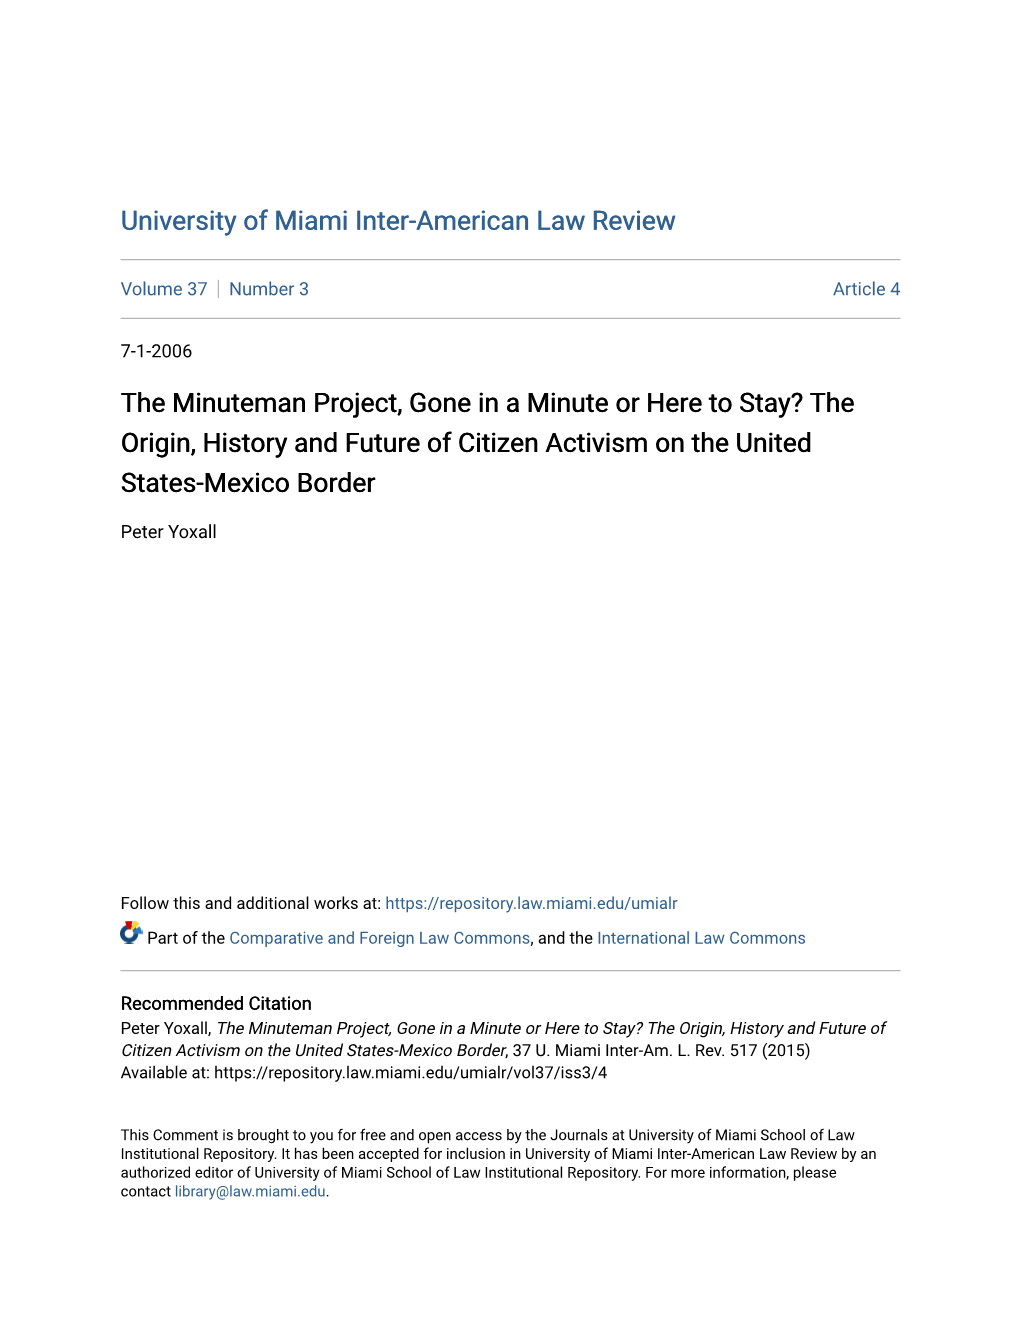 The Minuteman Project, Gone in a Minute Or Here to Stay? the Origin, History and Future of Citizen Activism on the United States-Mexico Border